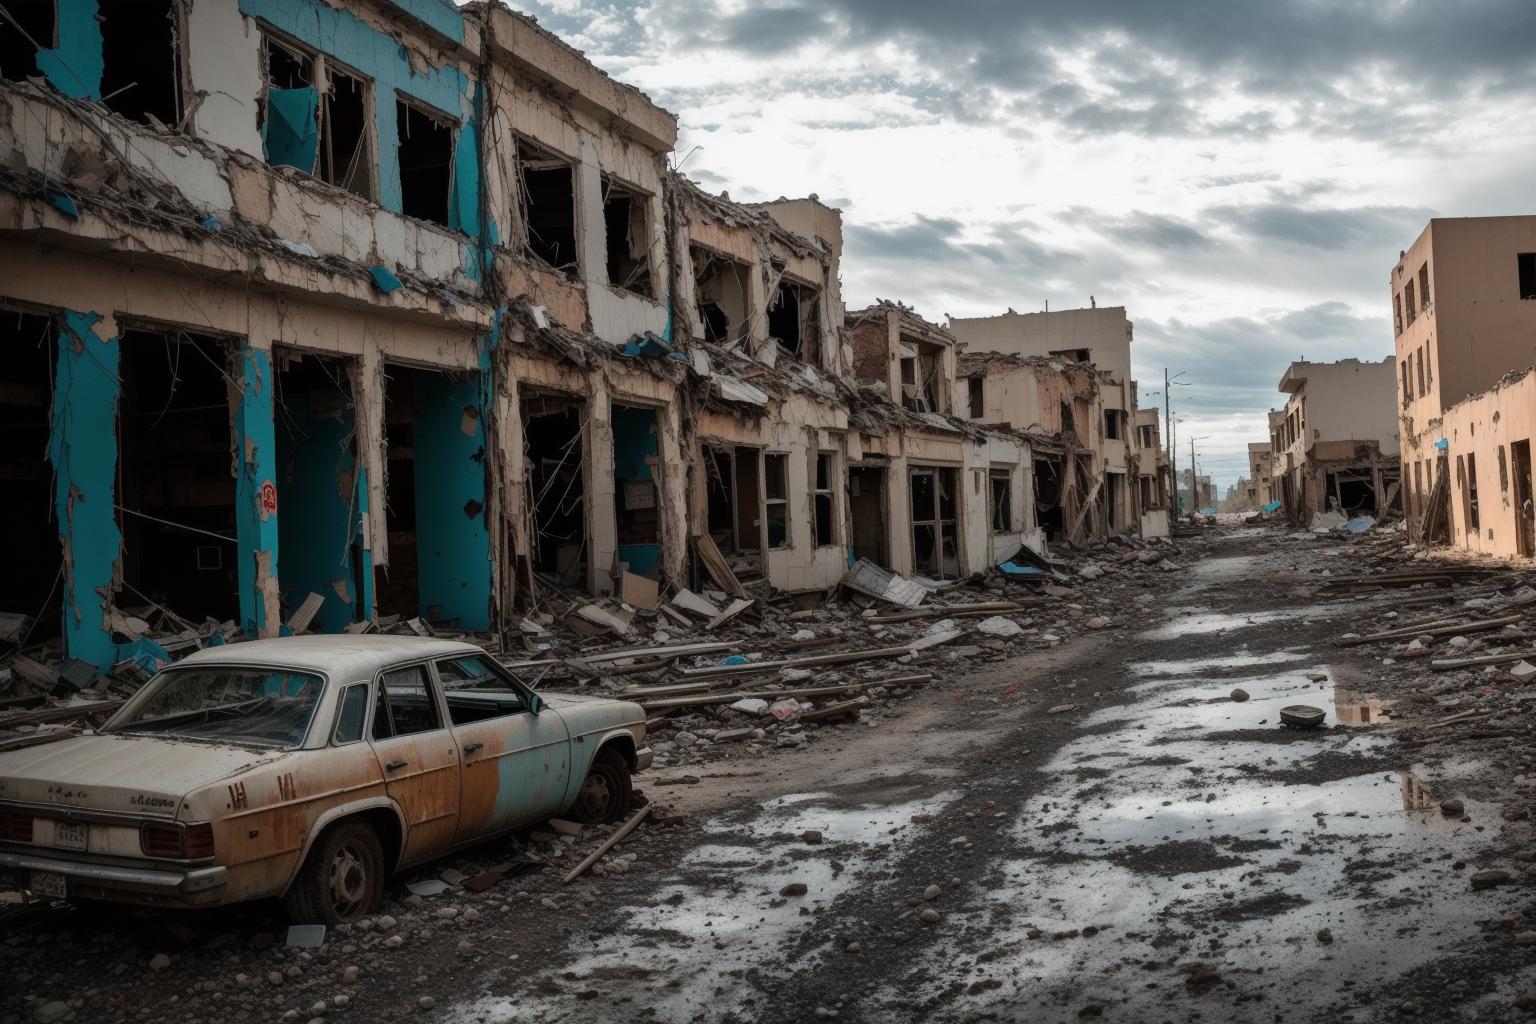 Abandoned City Street with Old Cars and Buildings in Ruins